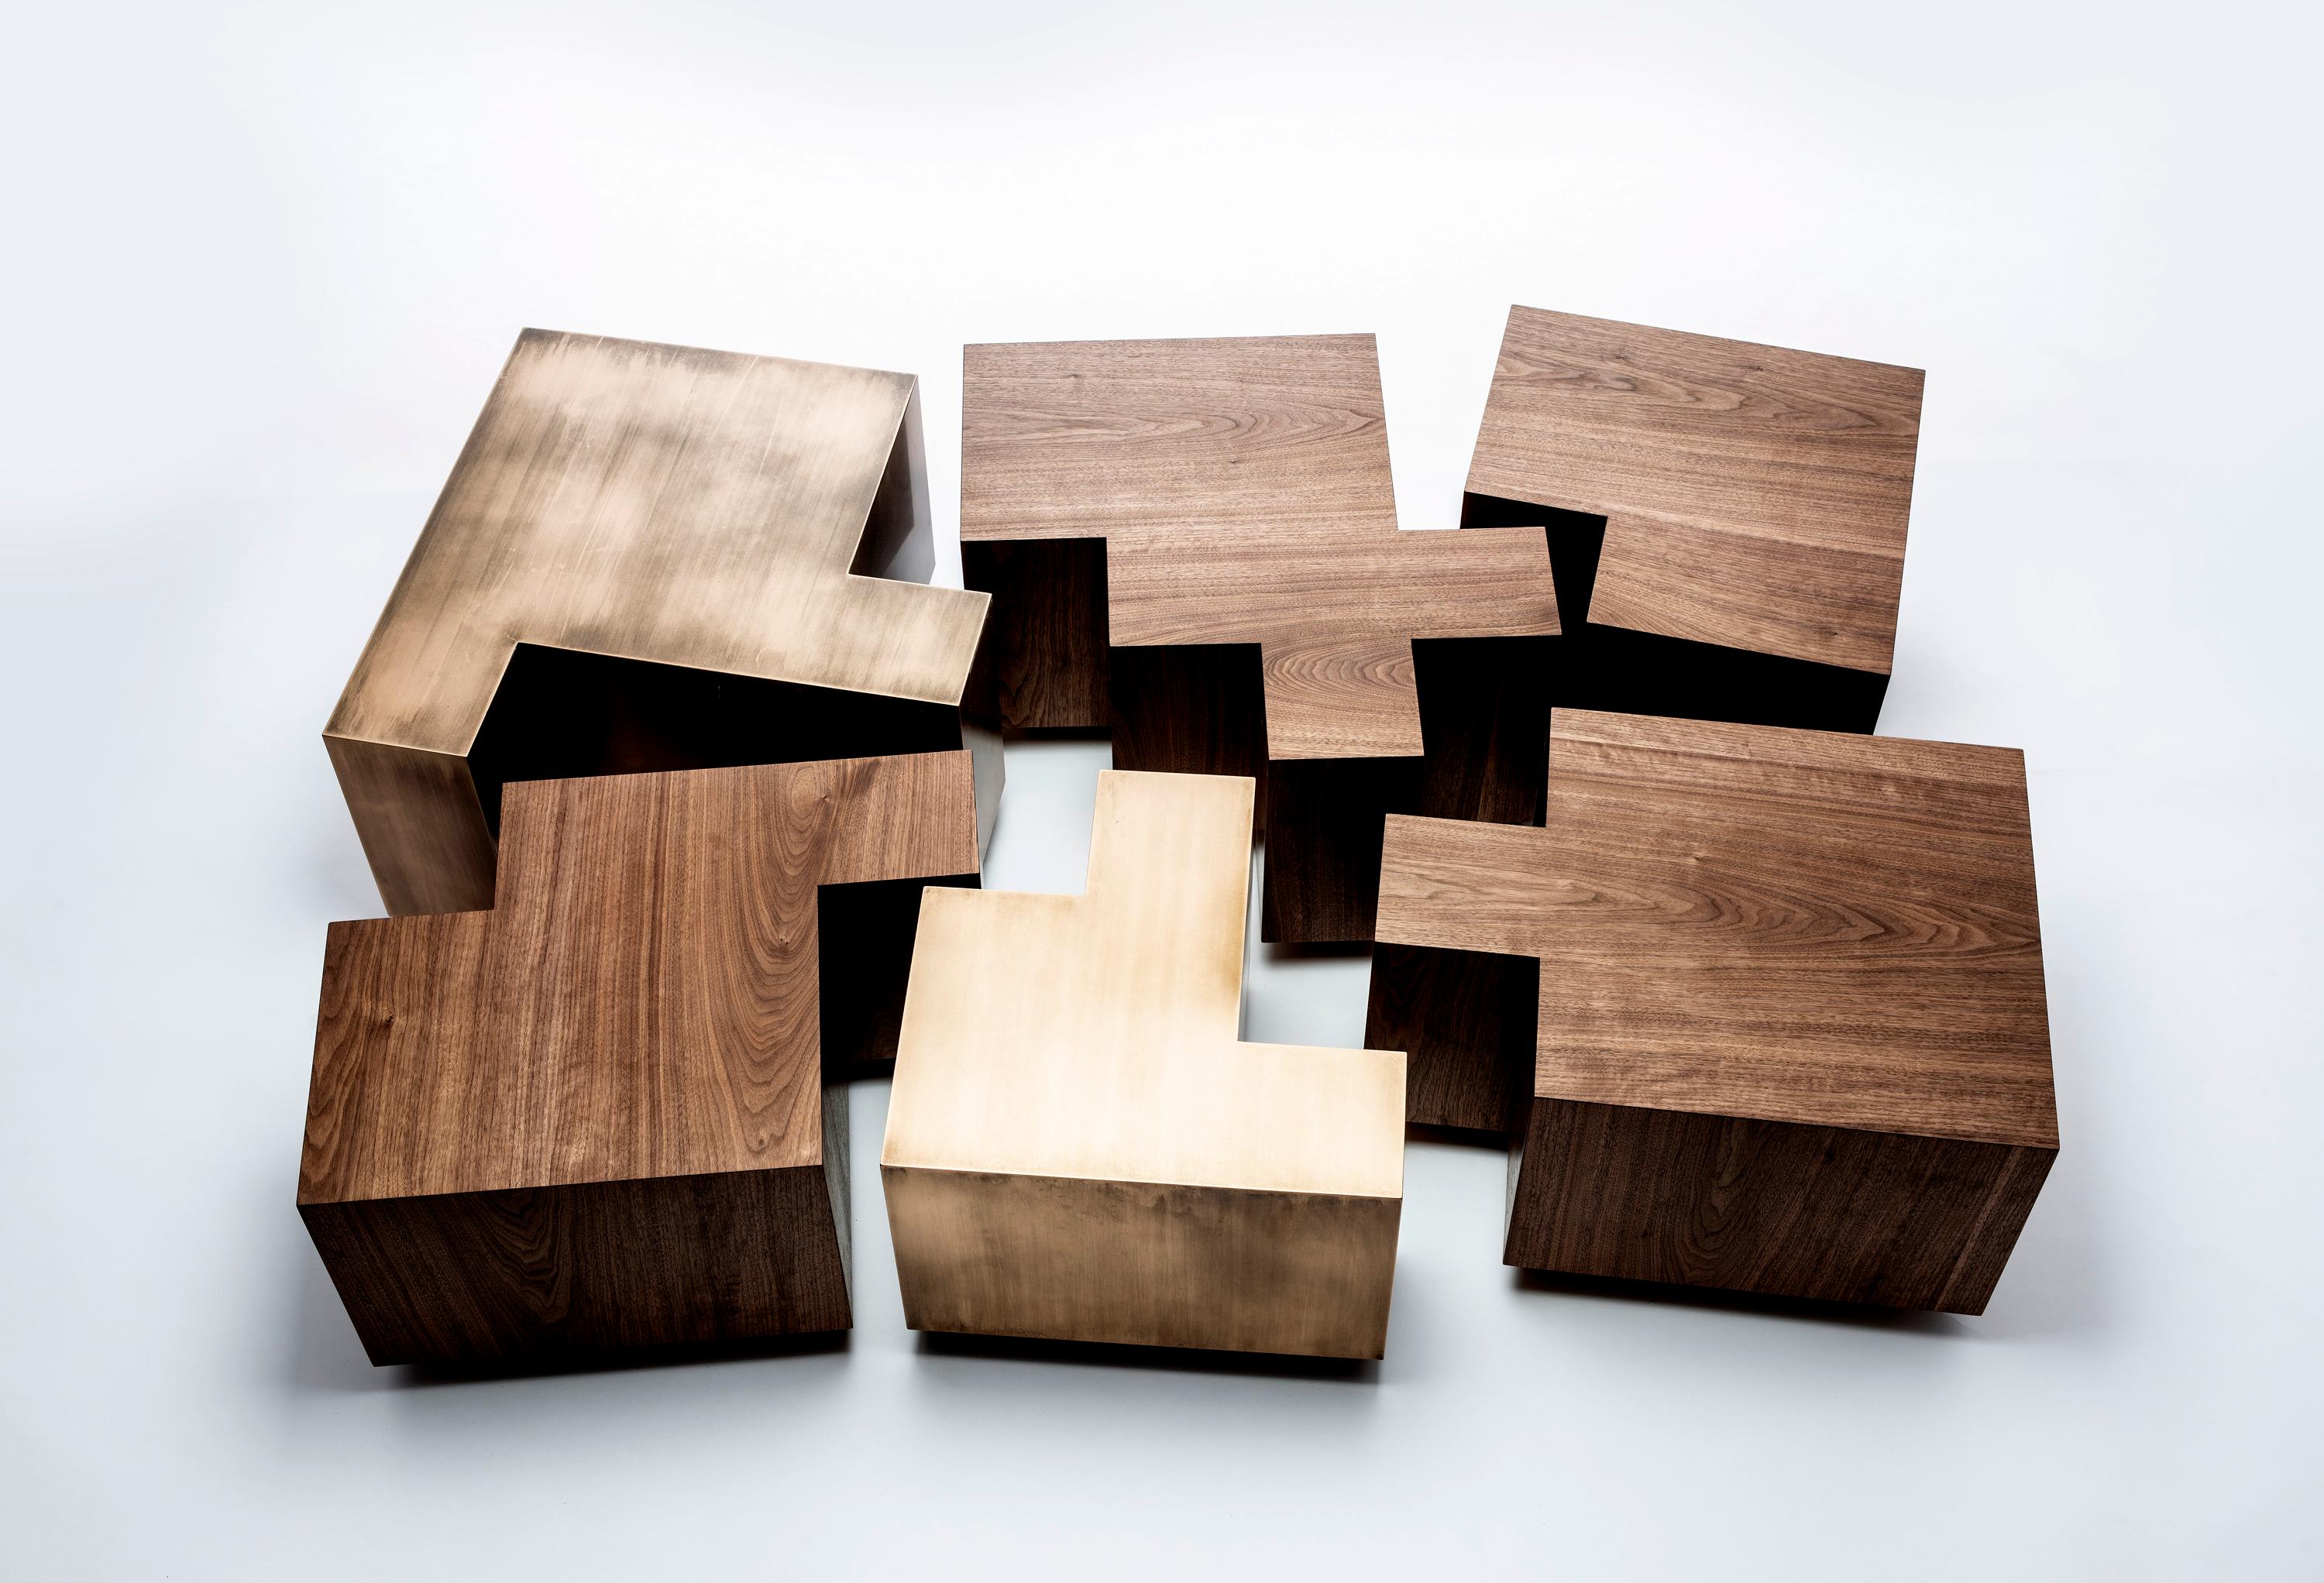 Black walnut puzzle table
Black walnut and burnished bronze
Measures: 36 x 54 x 14 in
Edition of 10

Icelandic-born Gulla Jónsdóttir creates unexpected and poetic modern architecture and interior spaces
in addition to sculptural furniture